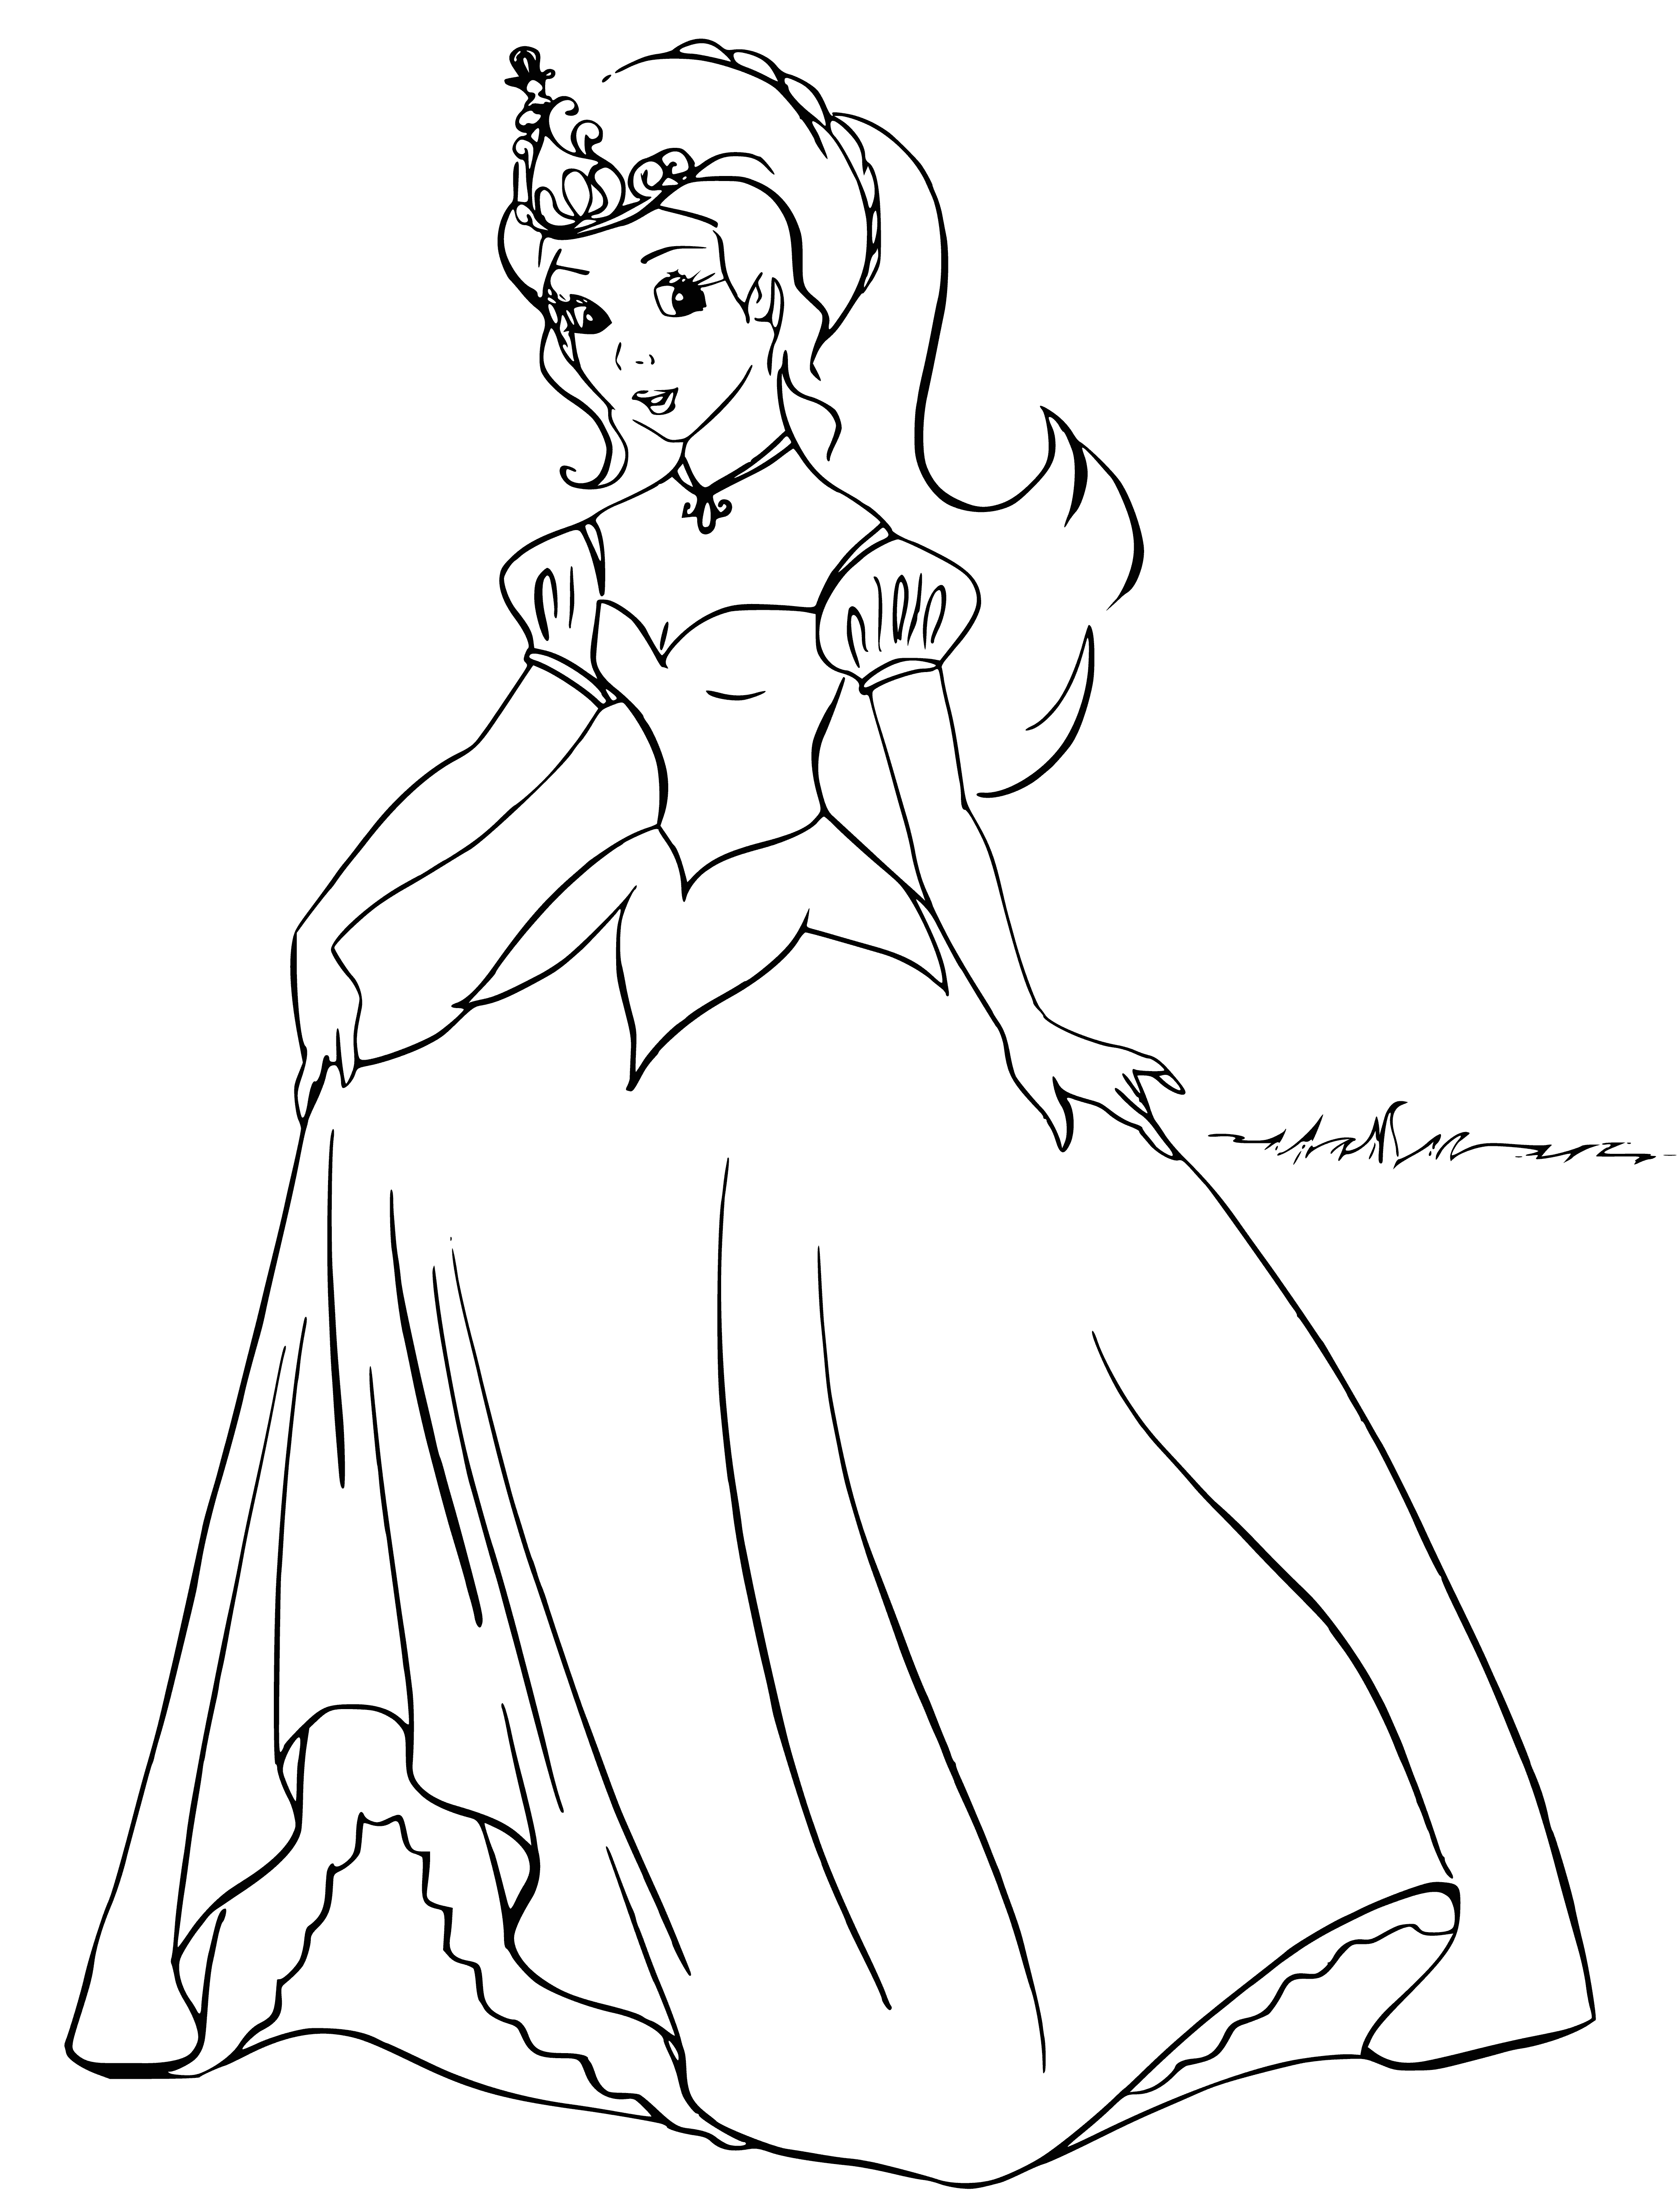 coloring page: Young princess stands before castle in white dress and blue cape. Wears headband, yellow sash and white gloves. #princess